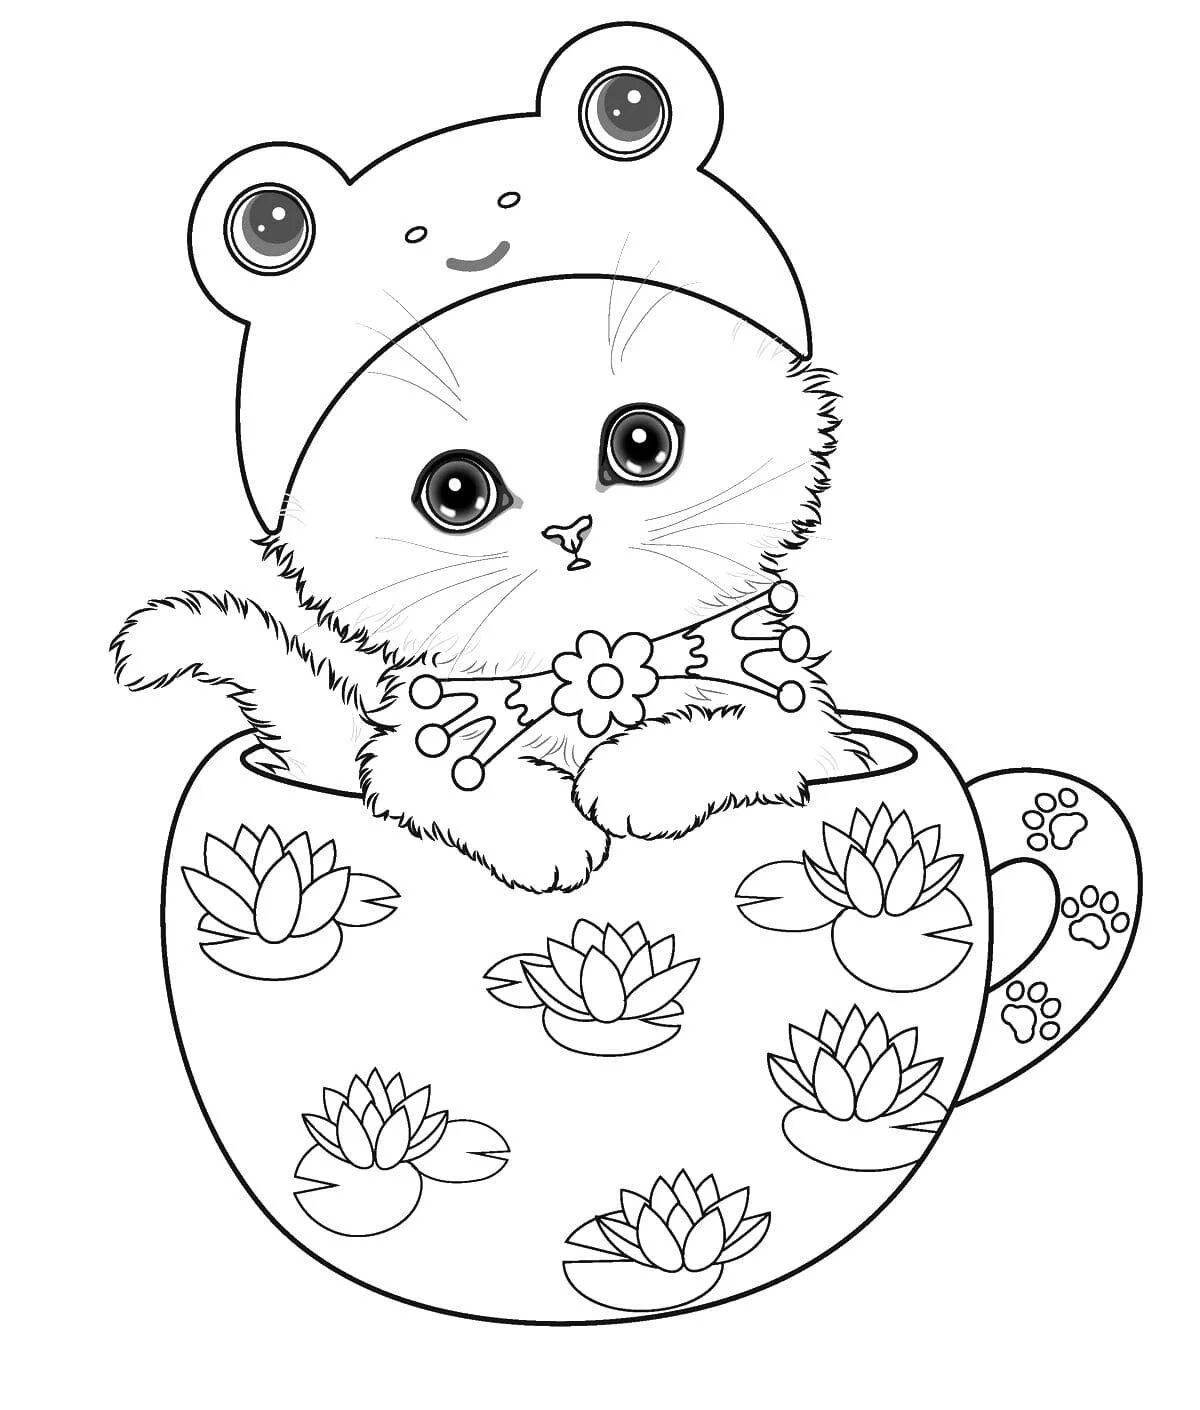 Lively cute cat coloring book